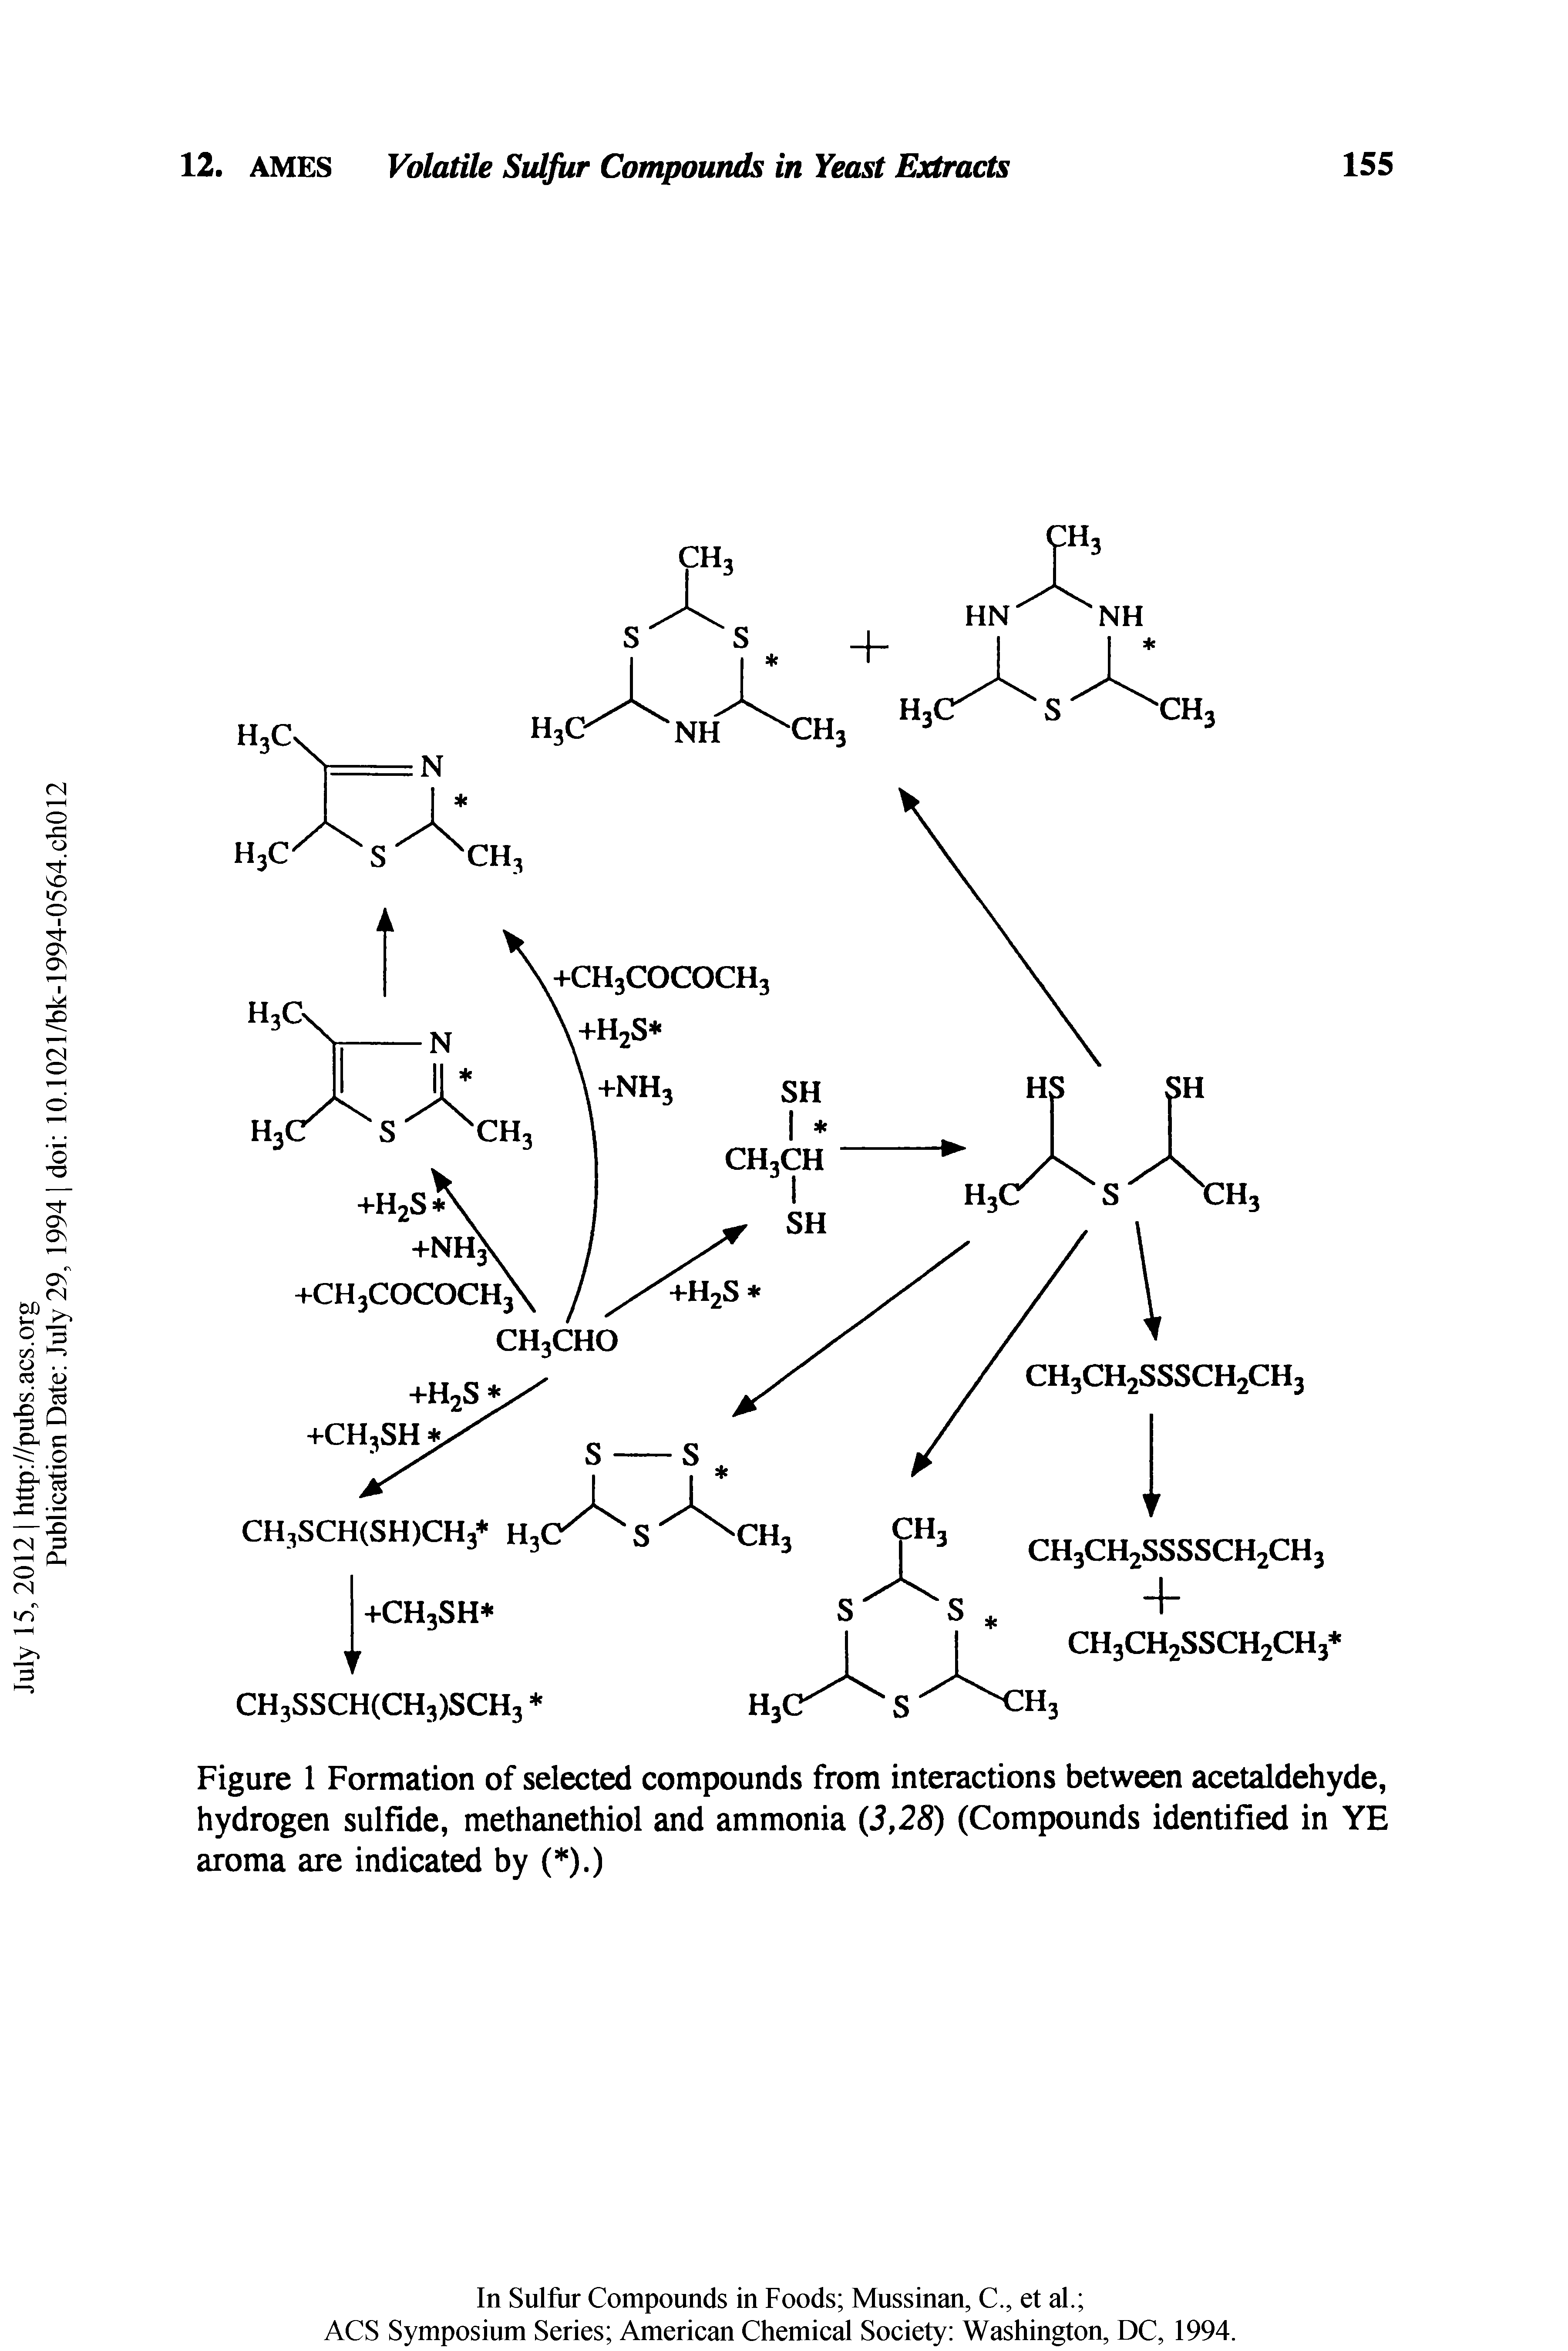 Figure 1 Formation of selected compounds from interactions between acetaldehyde, hydrogen sulfide, methanethiol and ammonia (5,28) (Compounds identified in YE aroma are indicated by ( ).)...